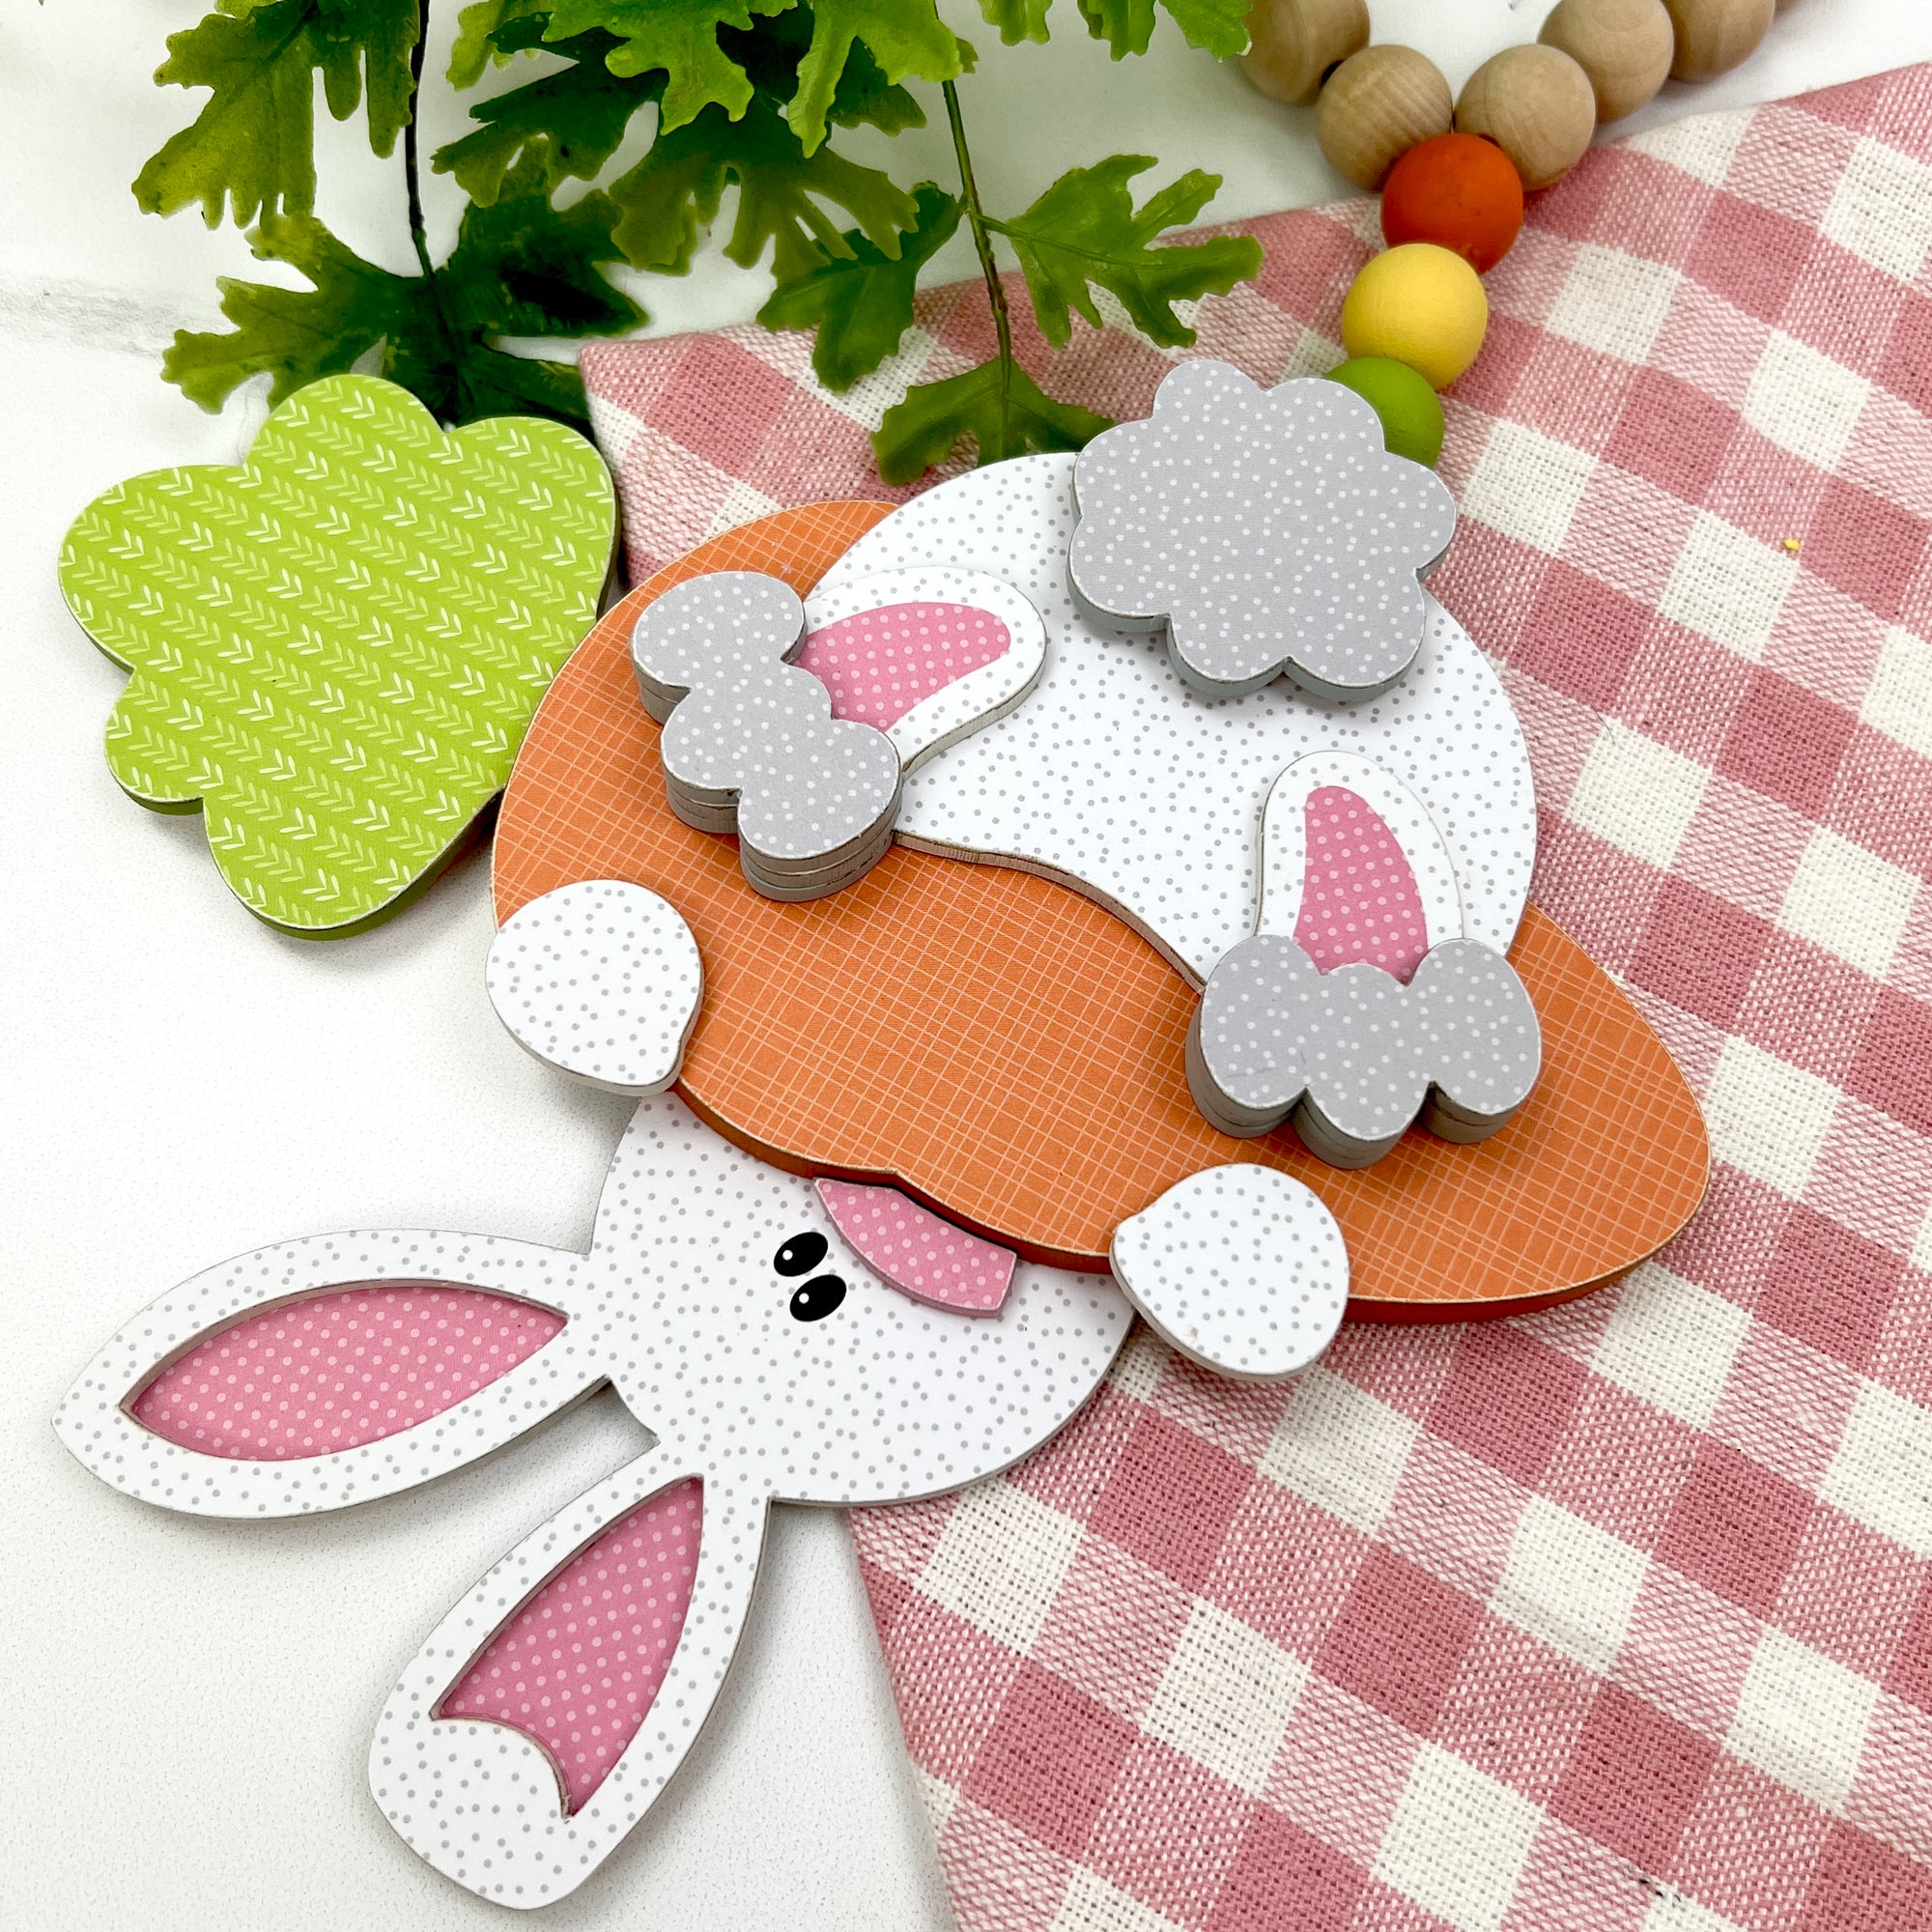 Bunny hanging upside down with wood beads for easter decorations